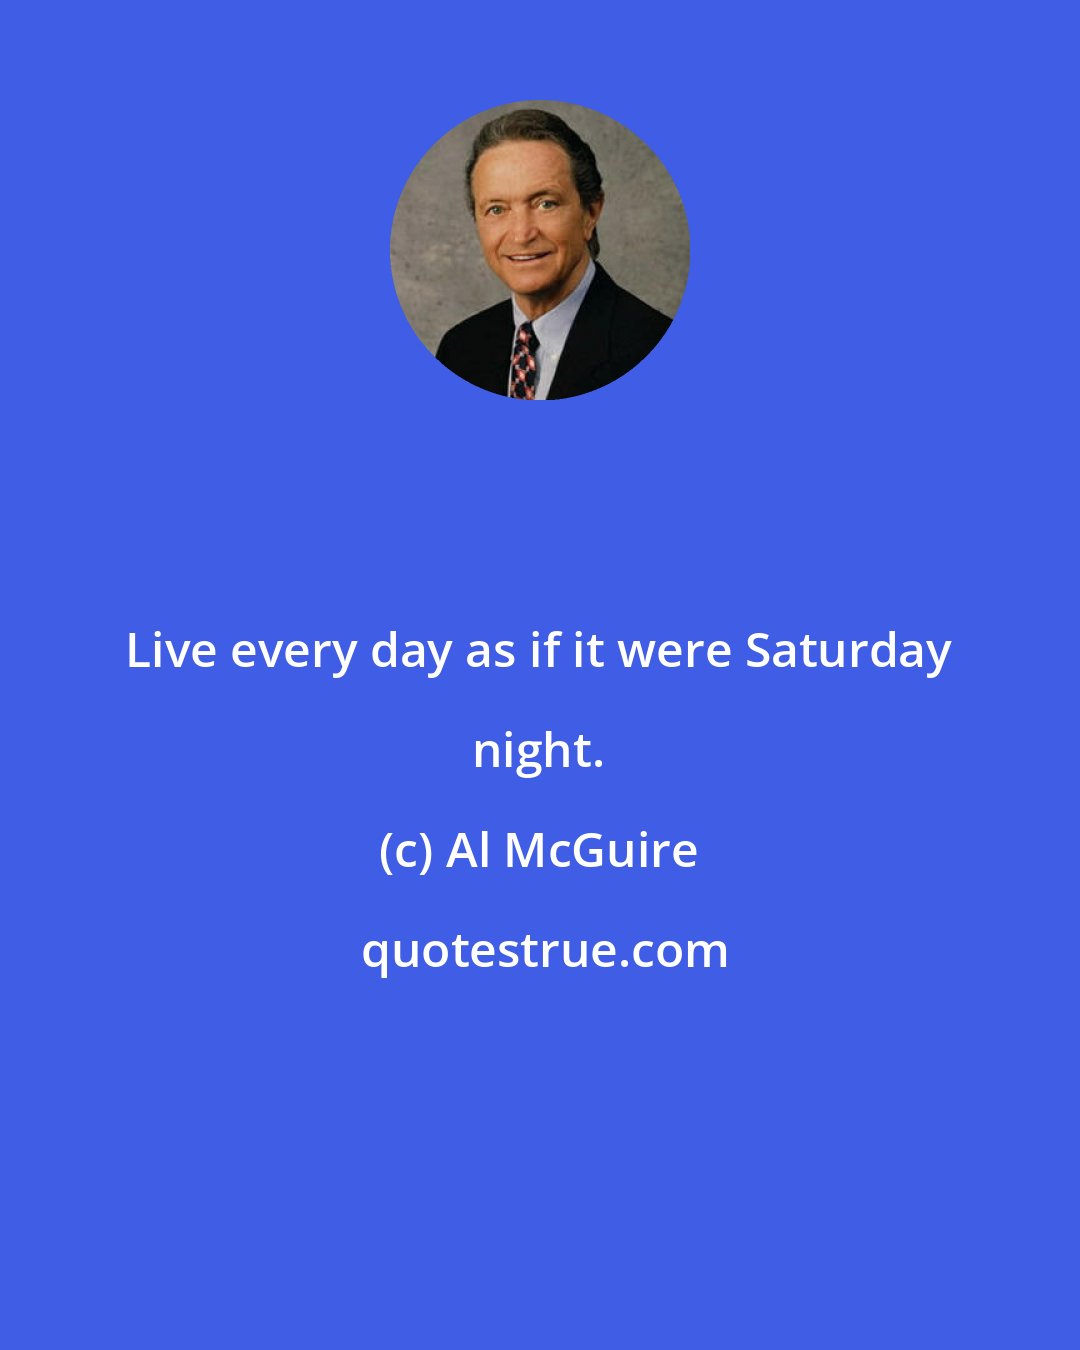 Al McGuire: Live every day as if it were Saturday night.